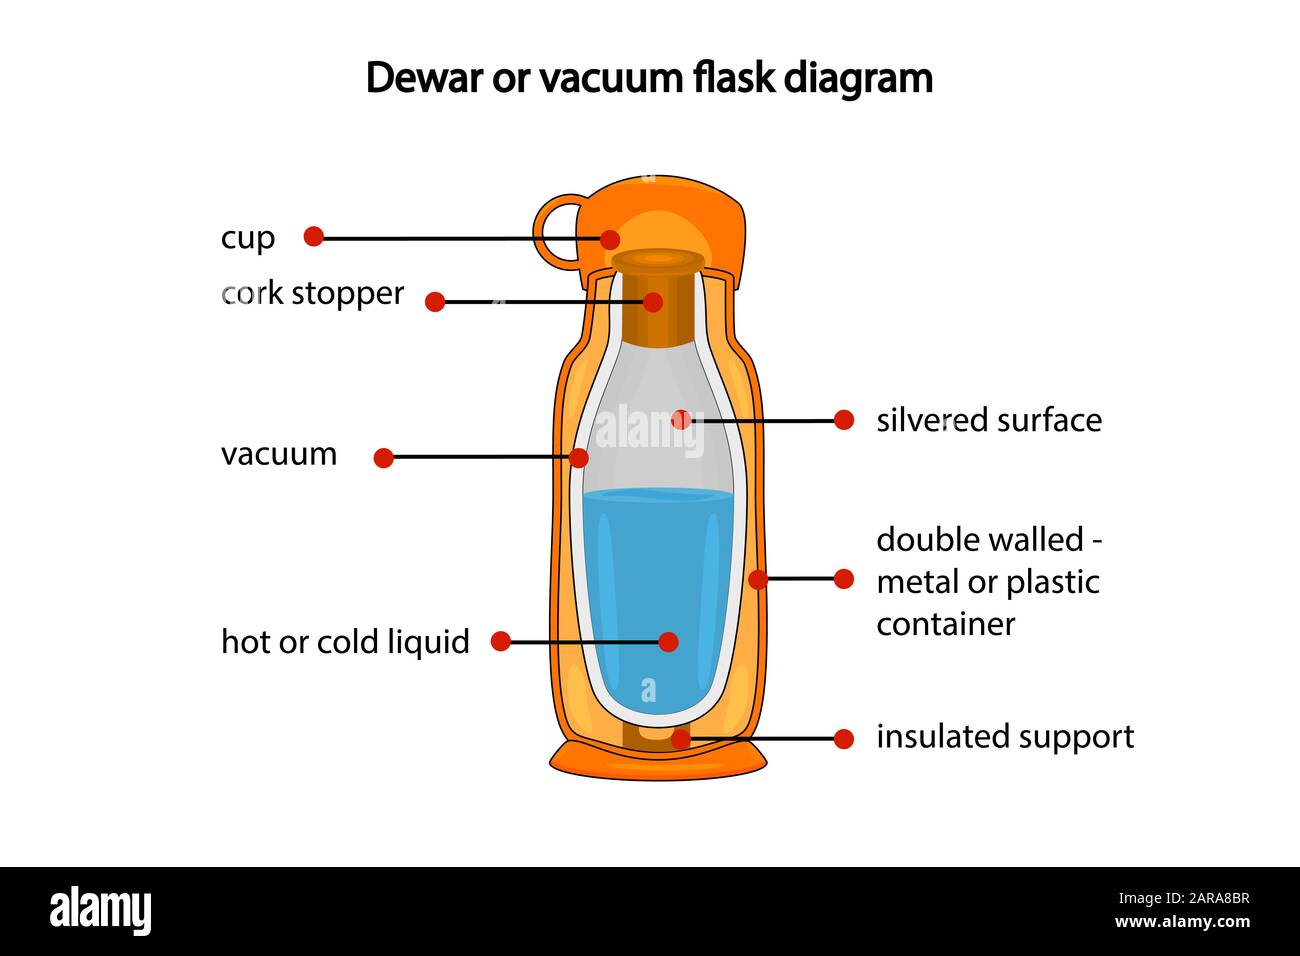 https://c8.alamy.com/comp/2ARA8BR/dewar-or-vacuum-flask-diagram-isolated-on-white-background-cross-section-cut-away-view-of-thermos-vacuum-flask-diagram-showing-vacuum-flask-layers-2ARA8BR.jpg